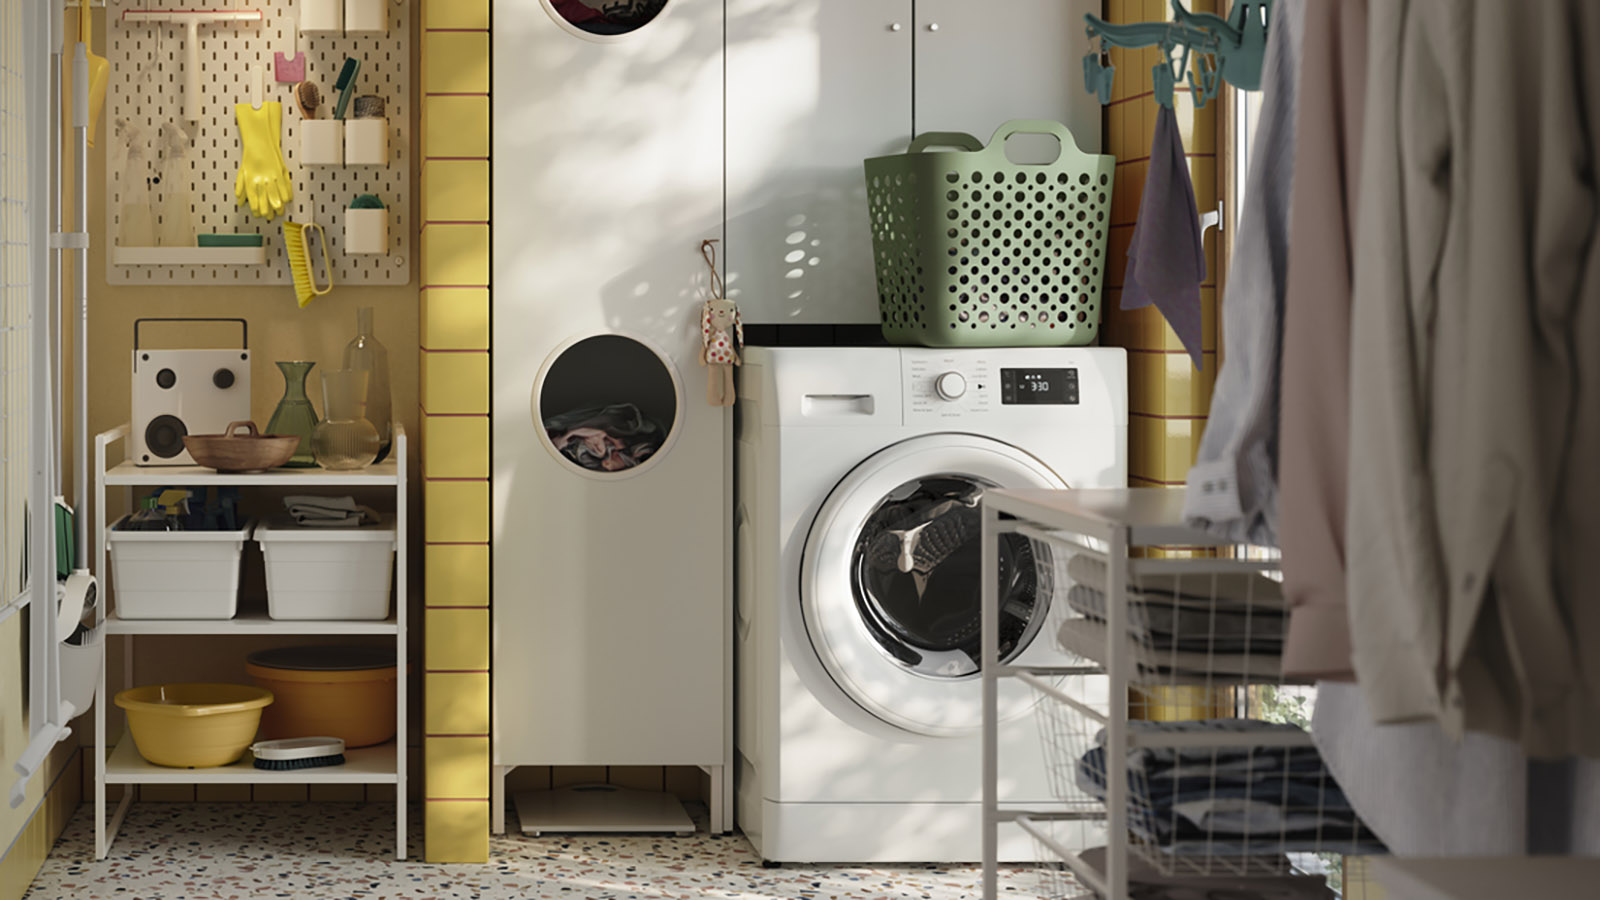 IKEA - A laundry room for multi-tasking, with a splash of colour